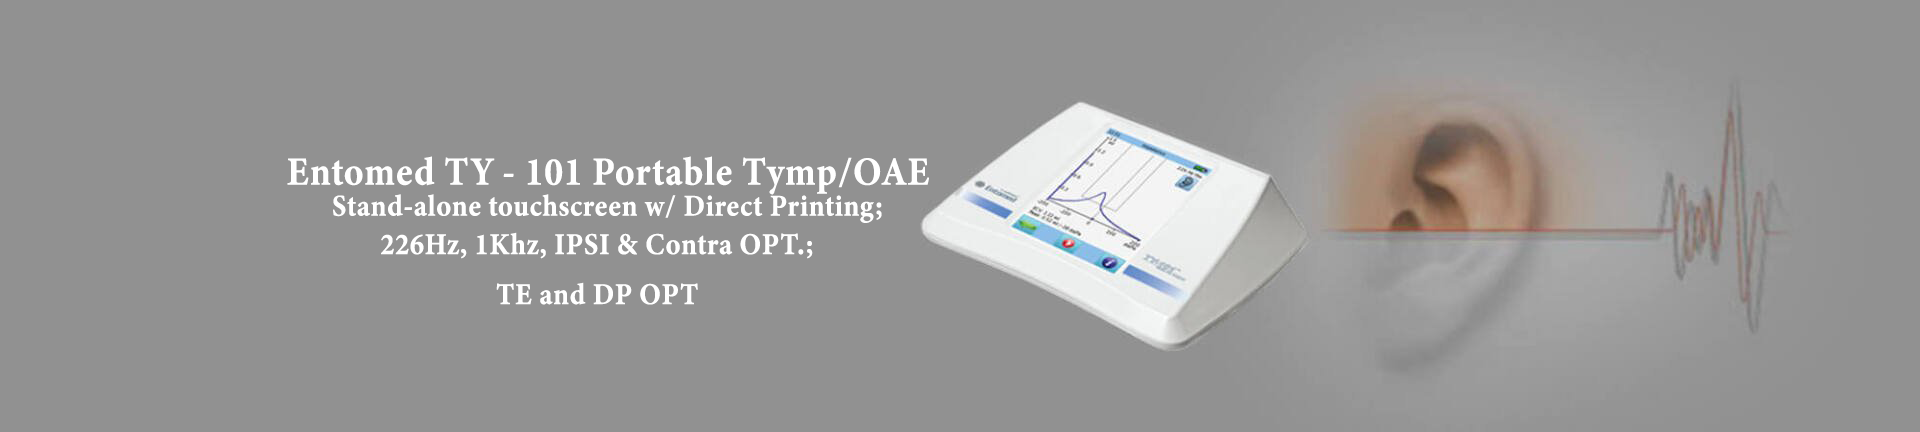 Entomed TY 101 Portable Tymp/OAE